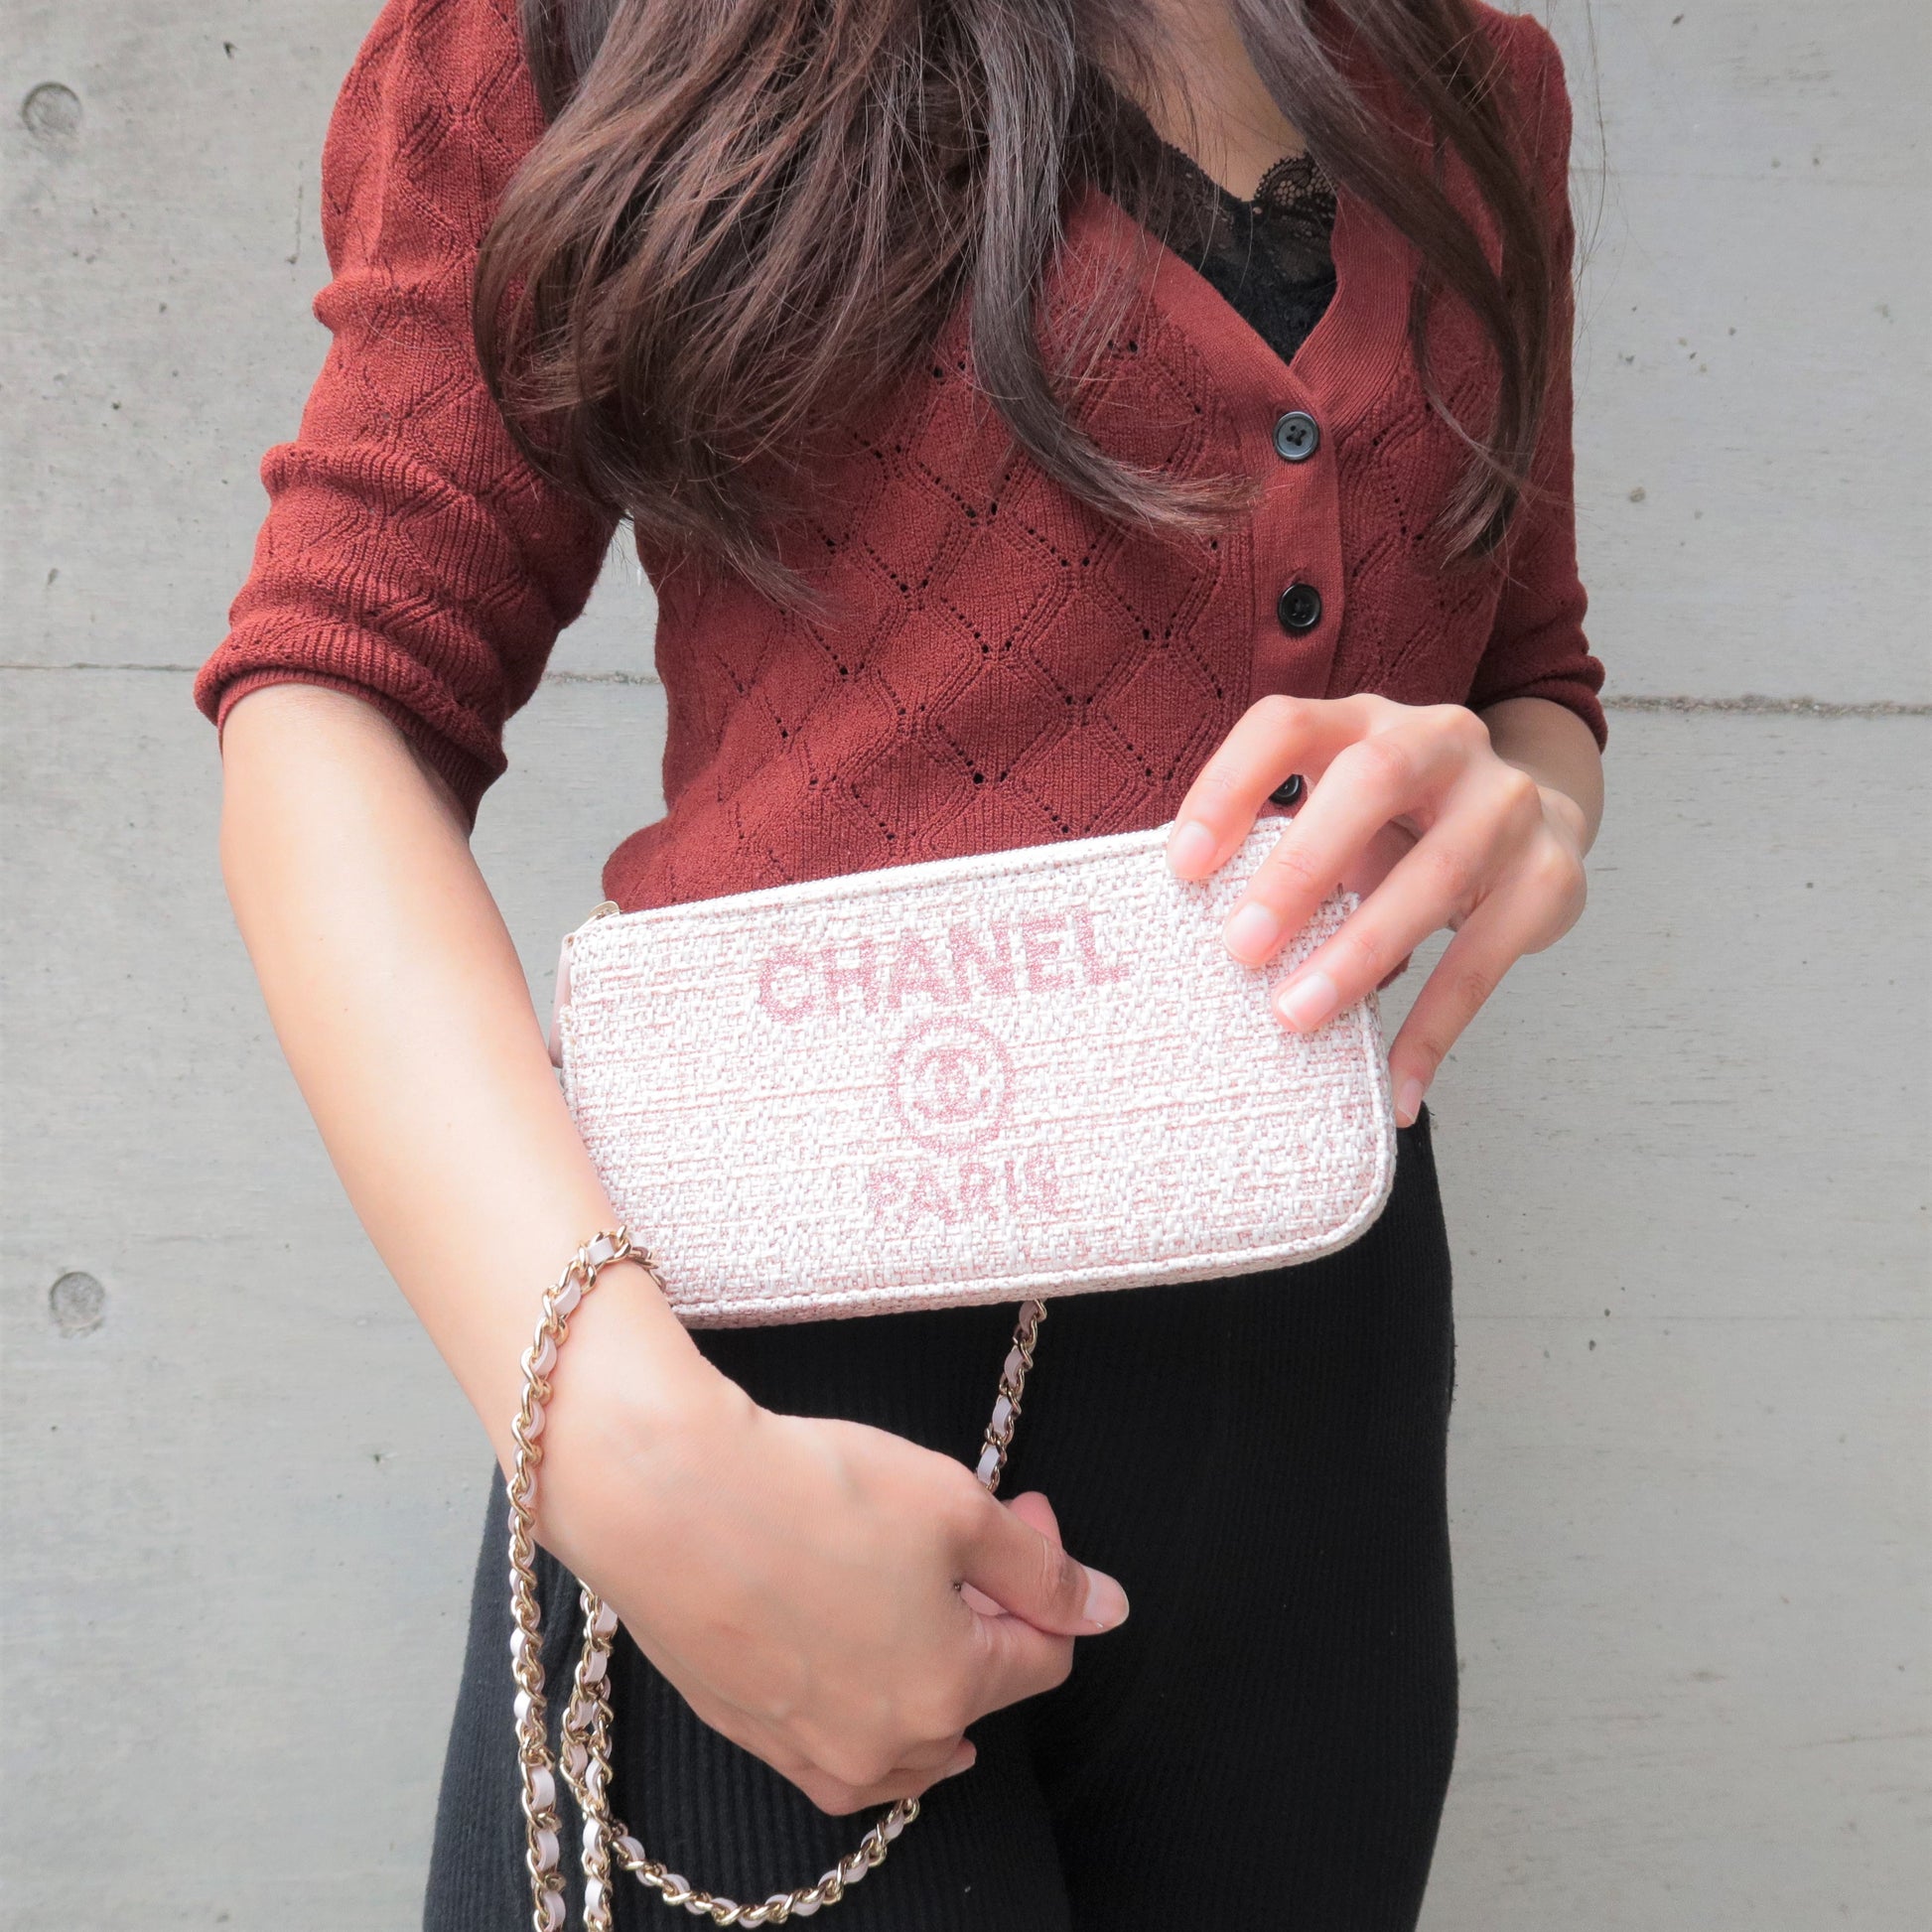 Chanel Red Chevron Leather Mademoiselle Compact Wallet For Sale at